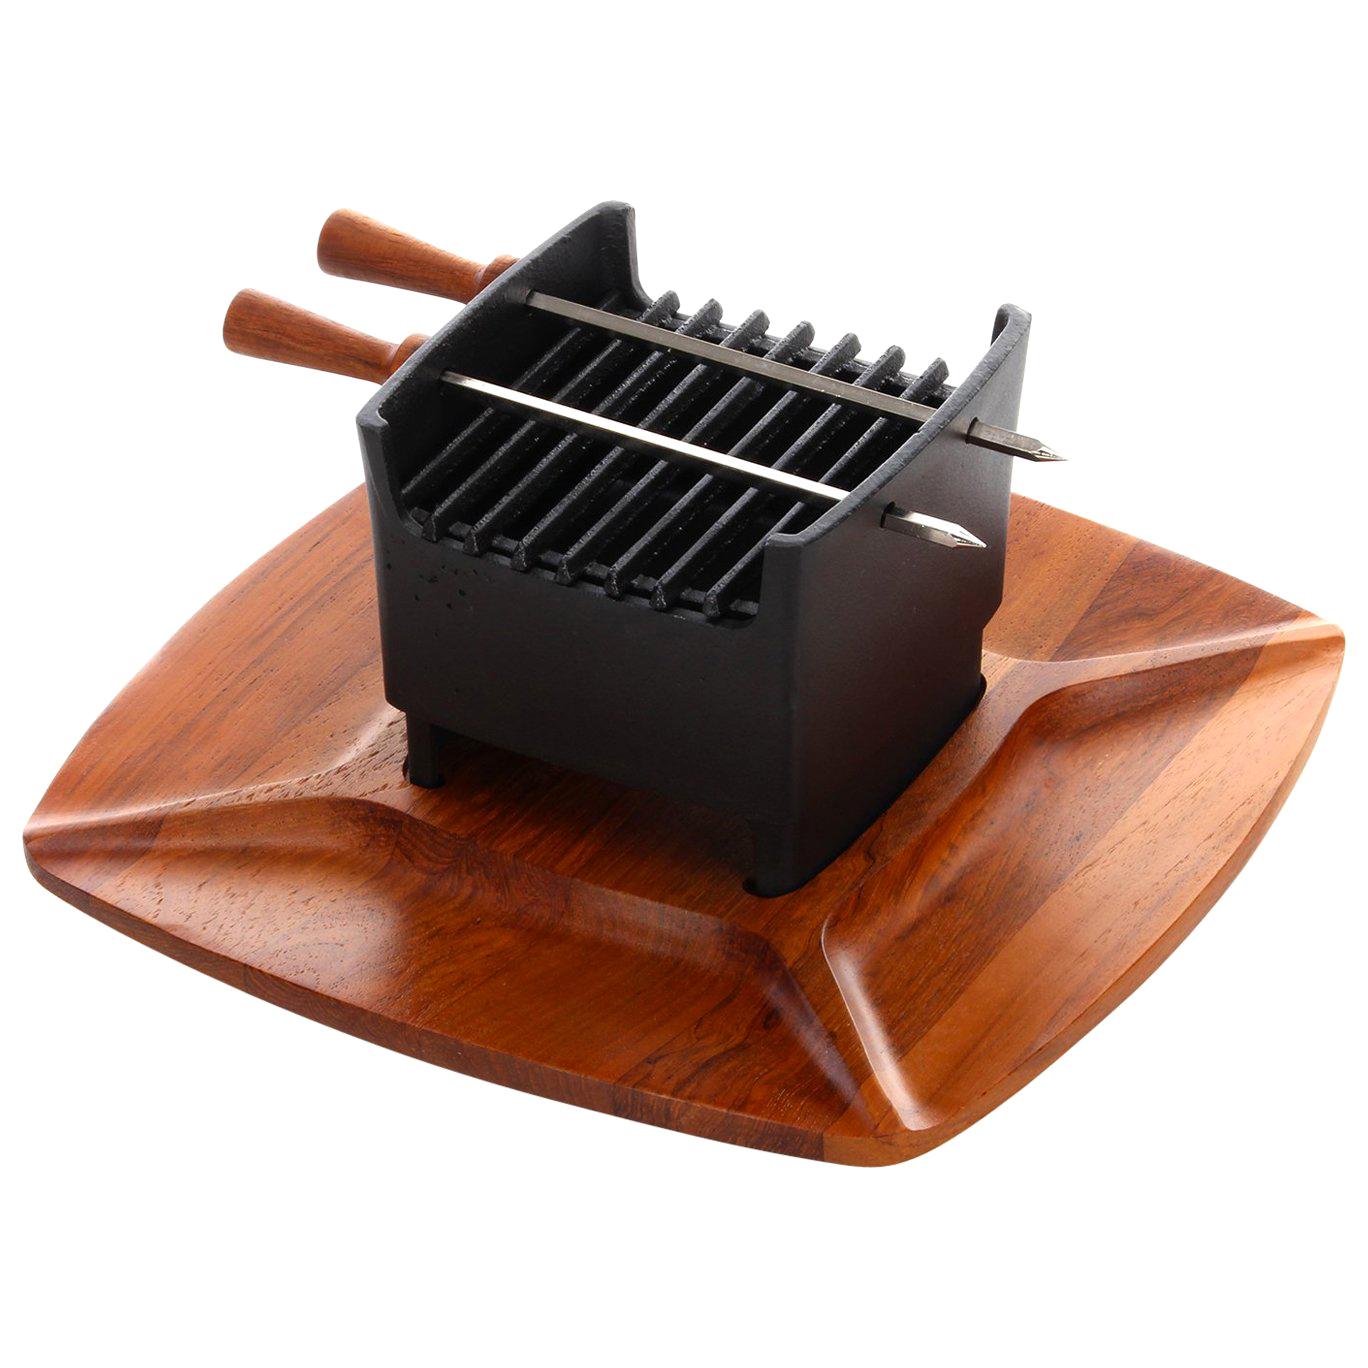 Table Grill 1960s Teak and Cast Iron Set by Digsmed, Unused and in Original Box